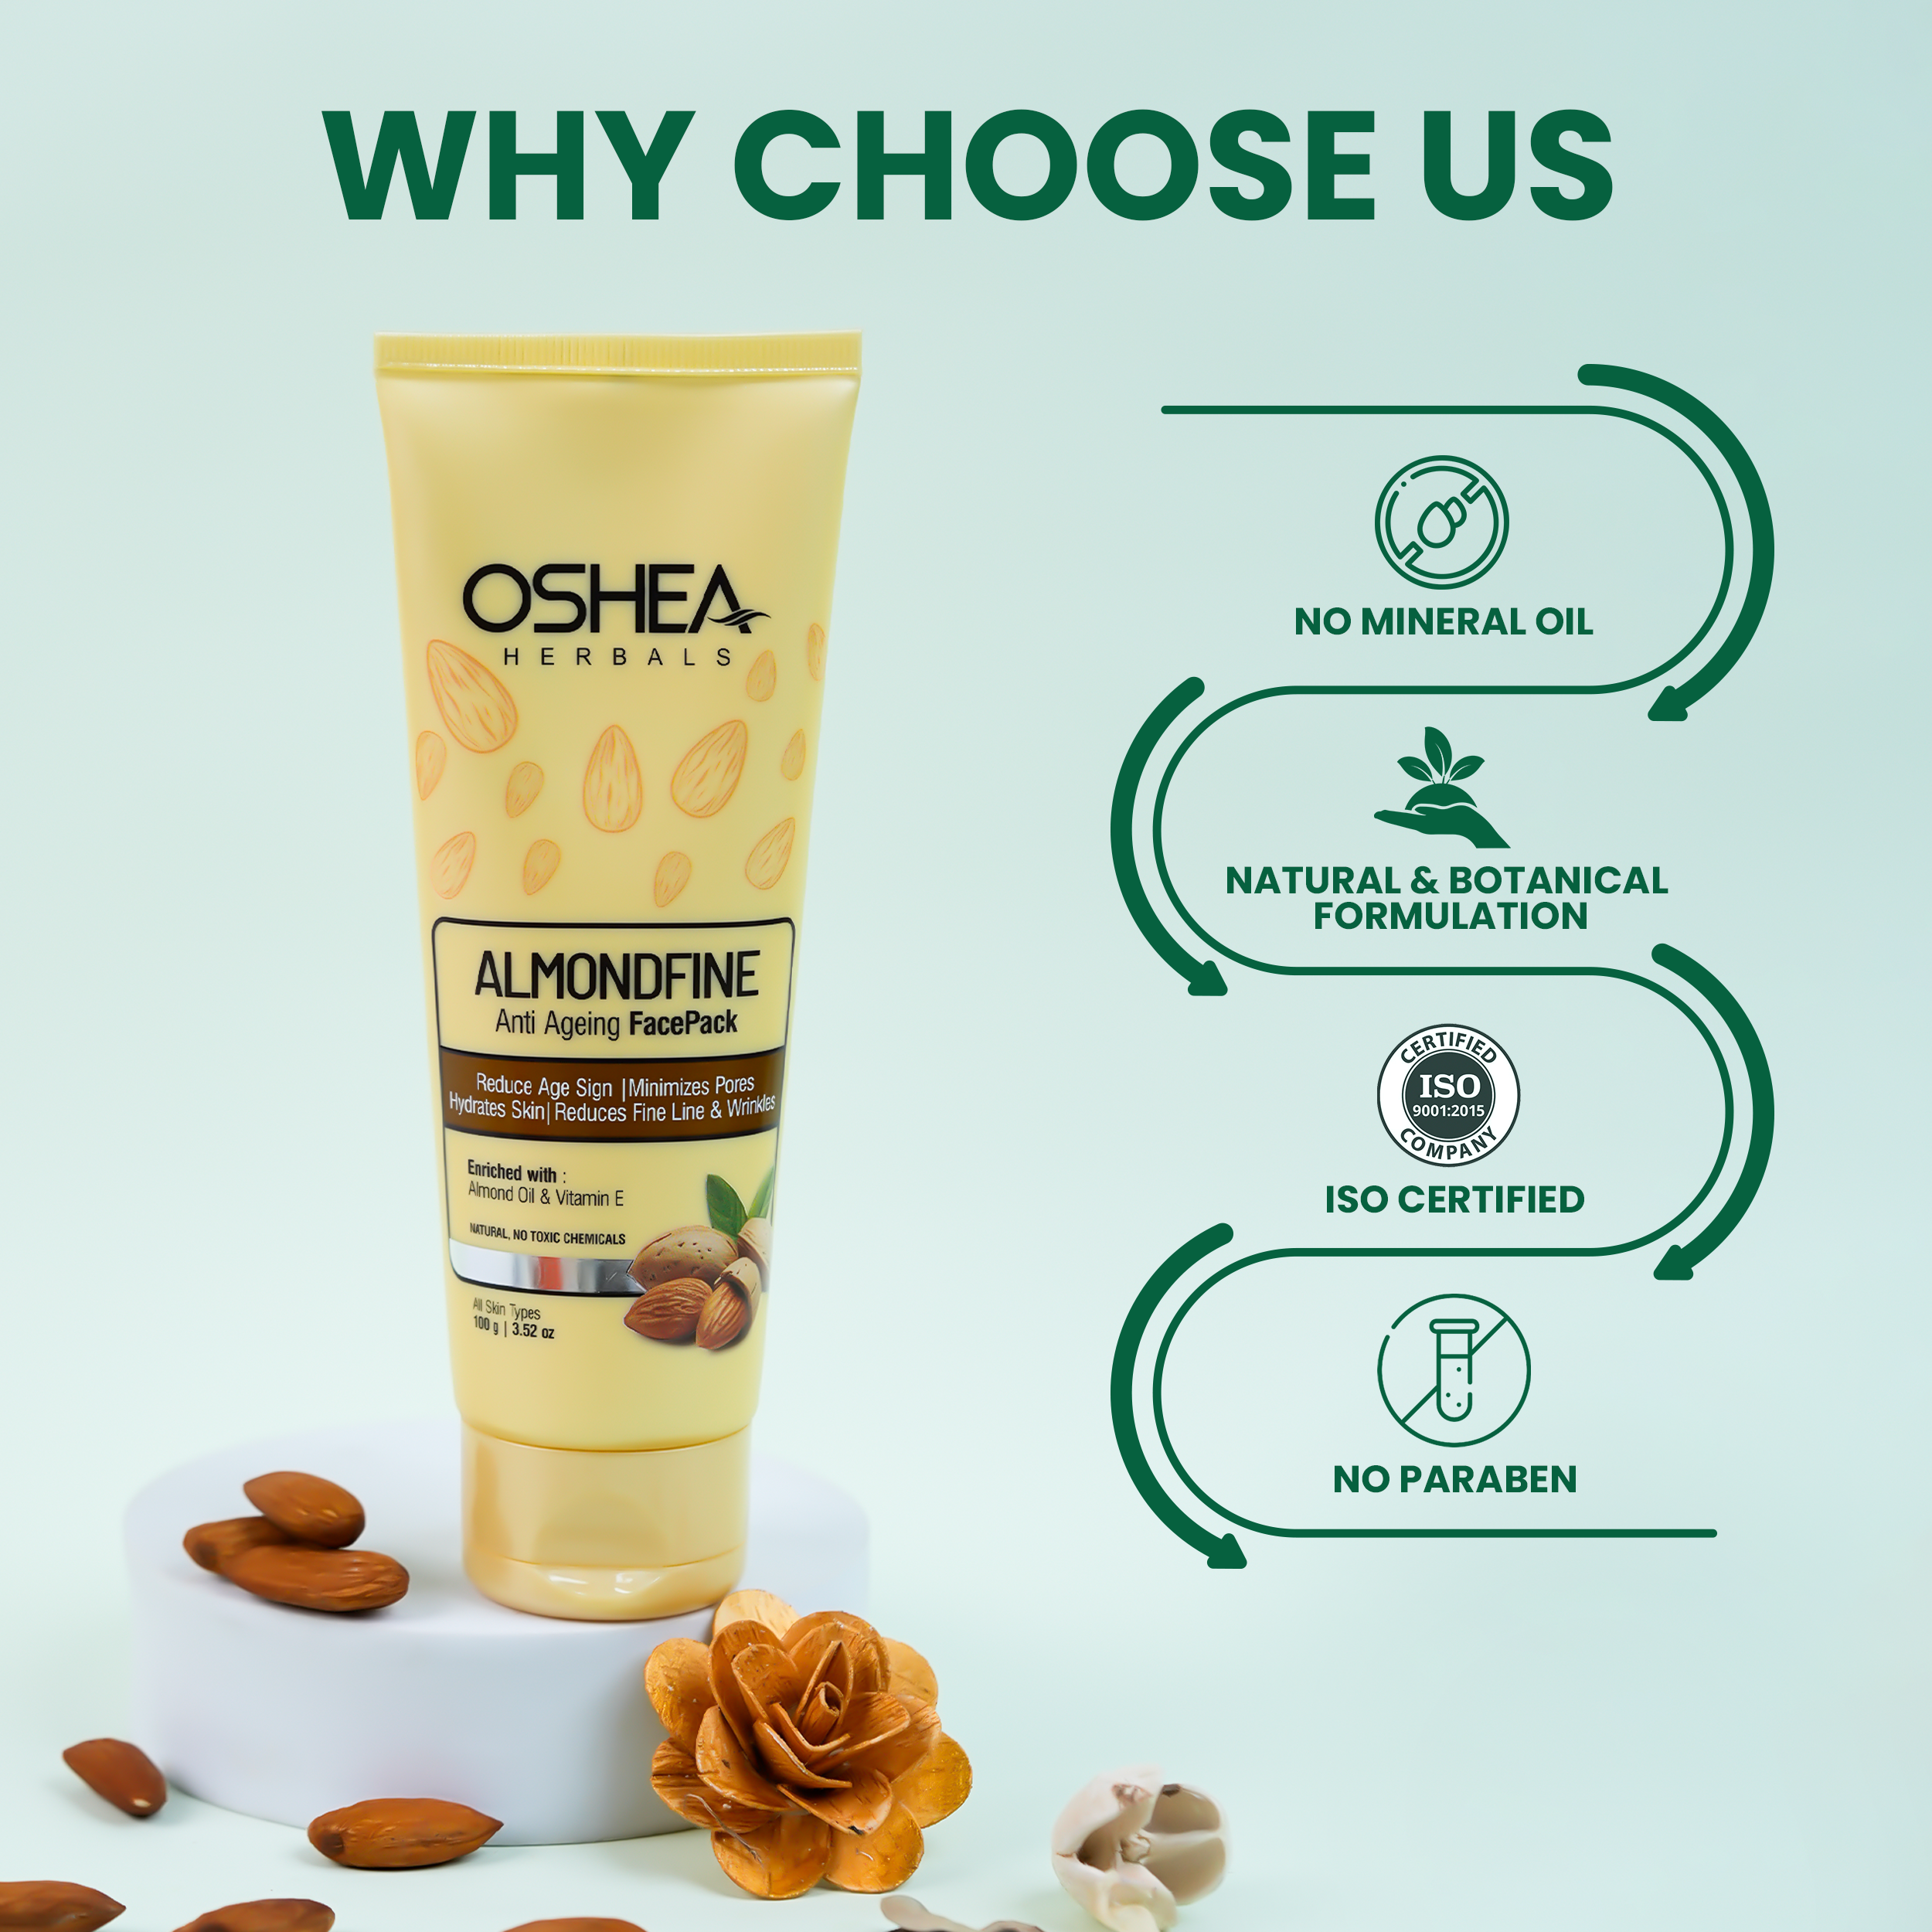 Why Choose Us Almondfine Anti-Ageing Face pack Tube Oshea Herbals